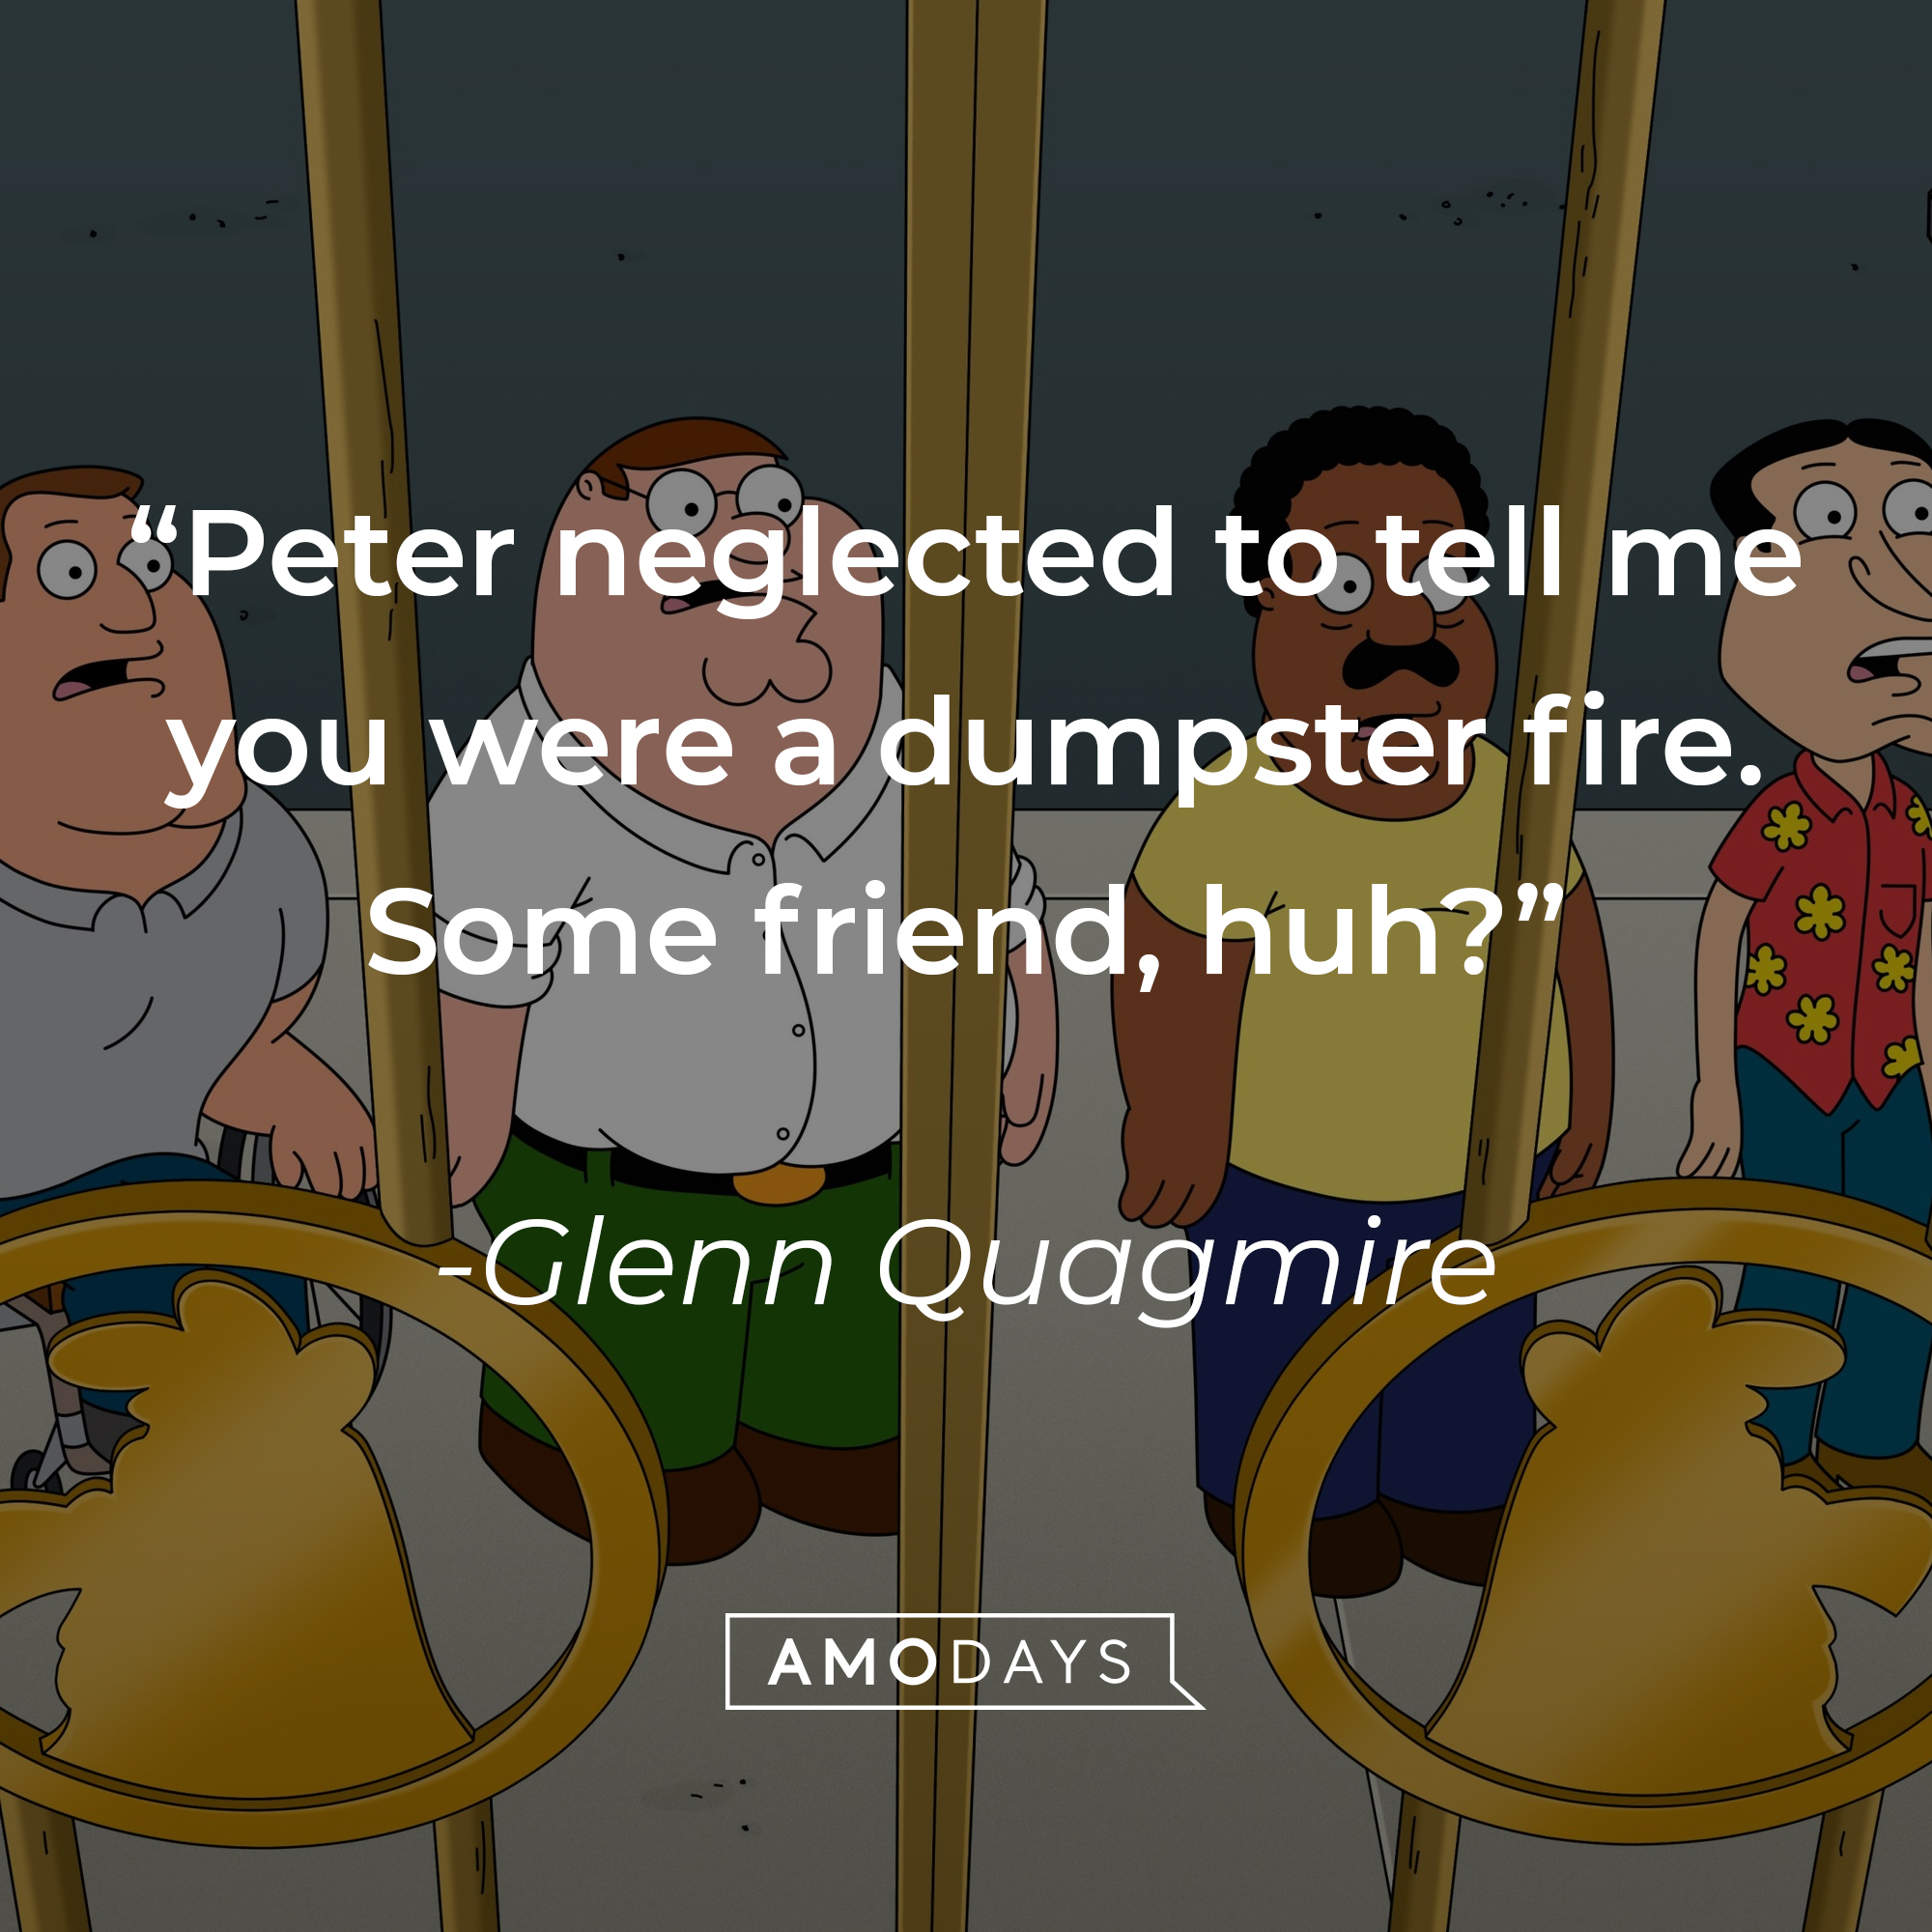 Glenn Quagmire with other characters from “Family Guy” and his quote: “Peter neglected to tell me you were a dumpster fire. Some friend, huh?” | Source: facebook.com/FamilyGuy